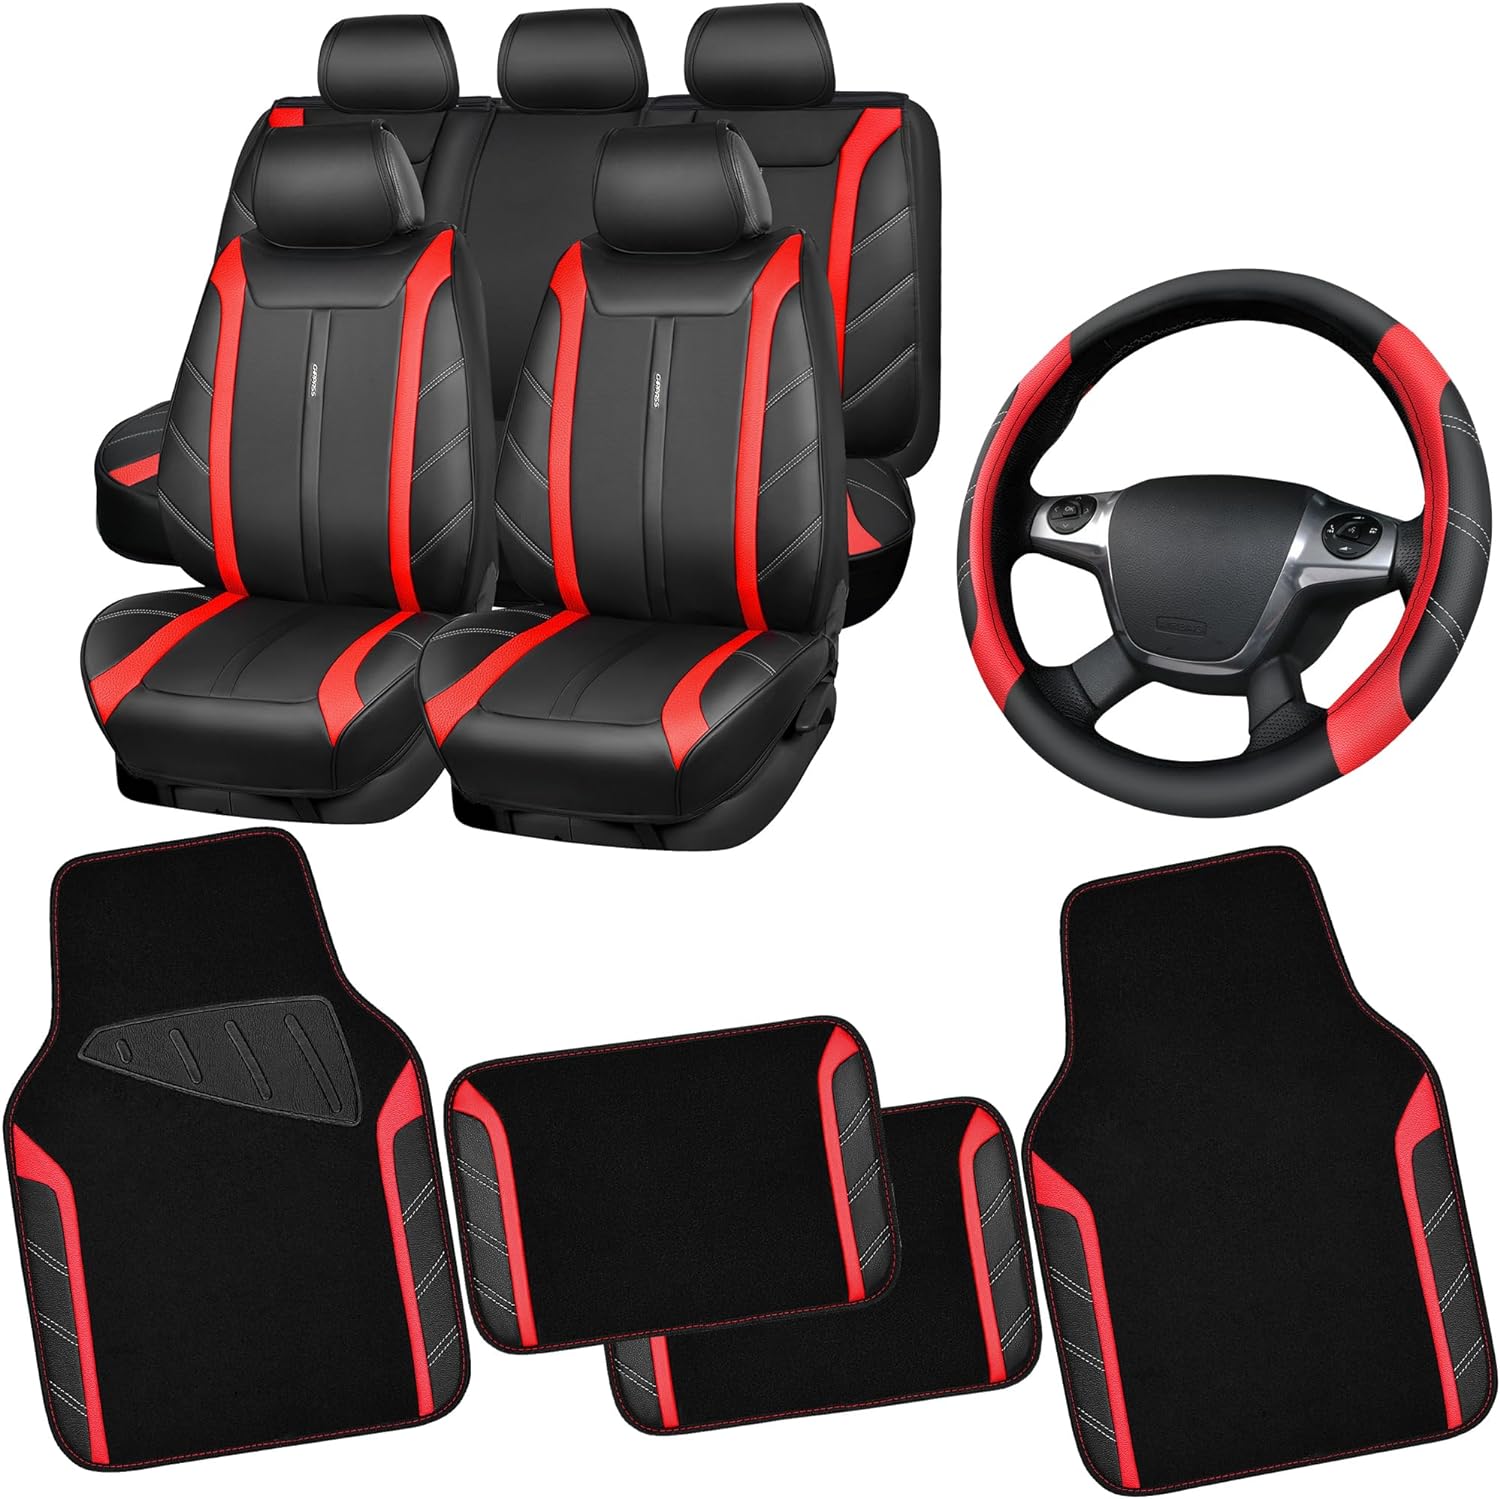 CAR PASS Leather Steering Wheel Cover, Car Floor Mats and Leather Seat Covers Full Set All Coverage Cushioned Universal Fit for SUV, Cars, Van, Sporty (Black and Red)